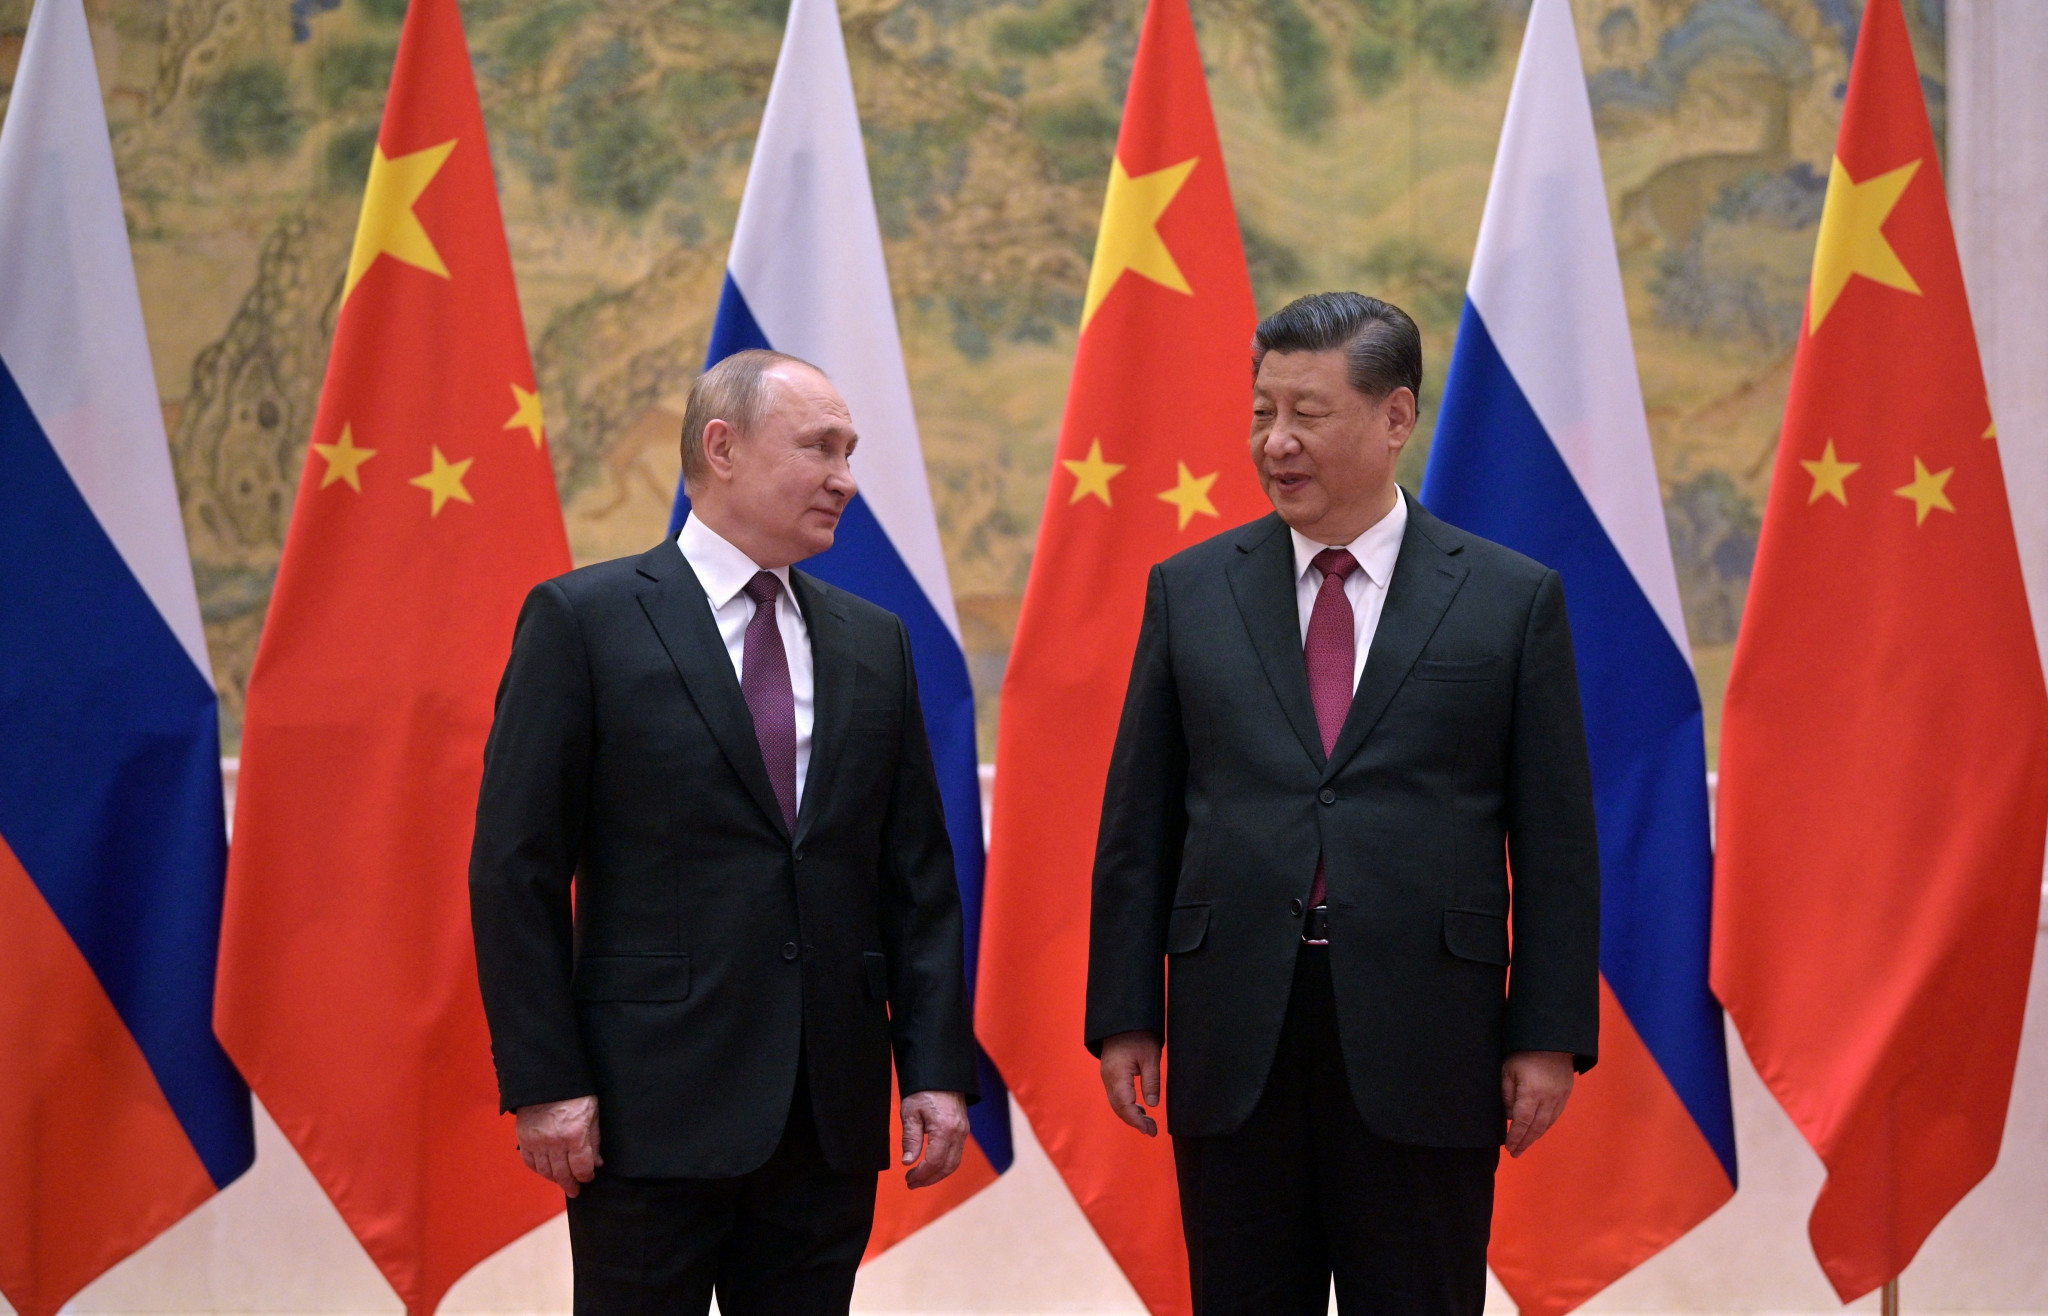 Xi and Putin use Beijing 2022 as opportunity to hold talks and strengthen ties